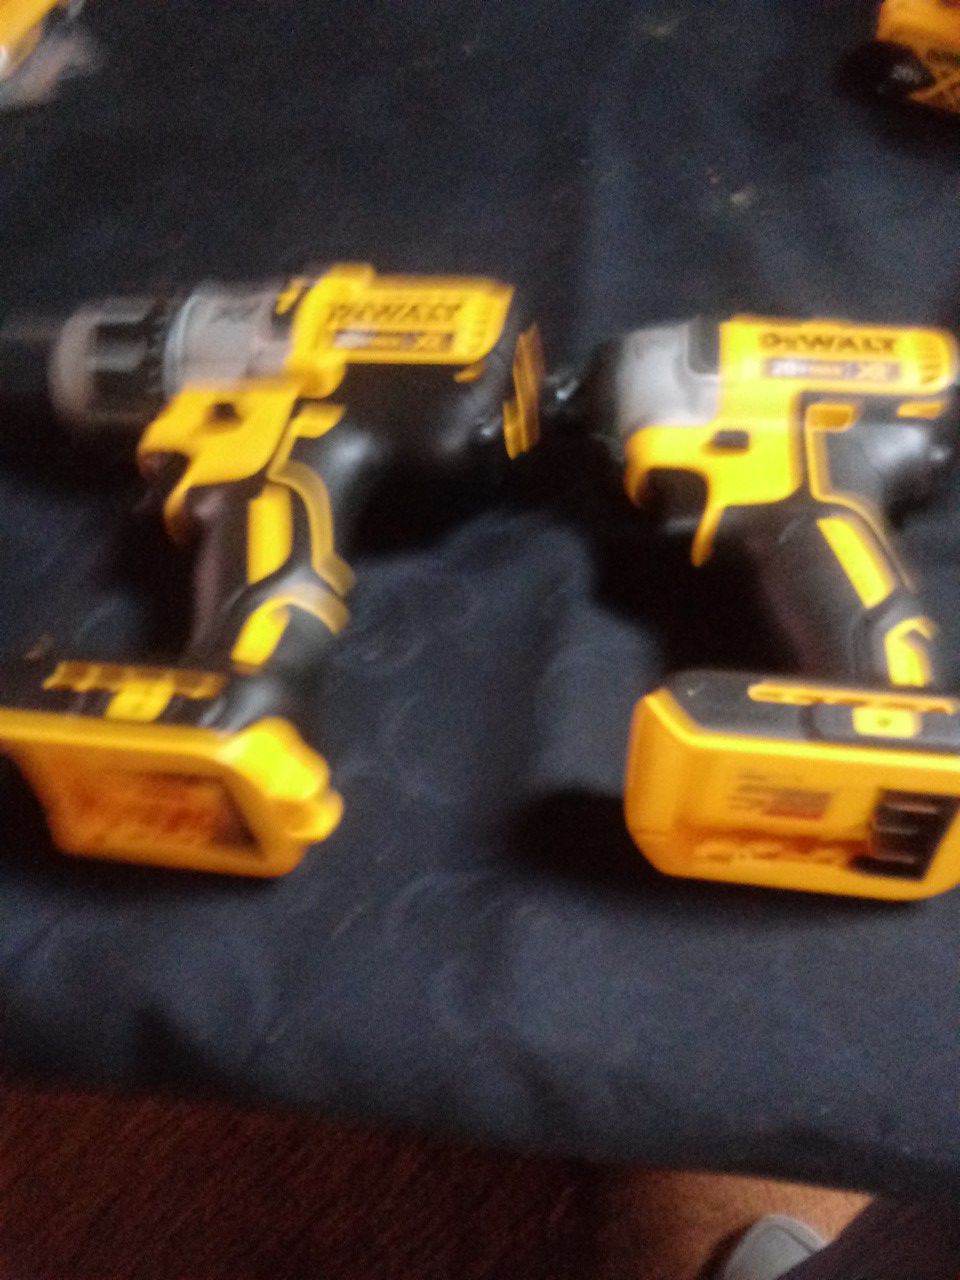 Dewalt 20 volt xr brushless hammer drill 3 speed and a brushless 3 speed inpack driver tools only